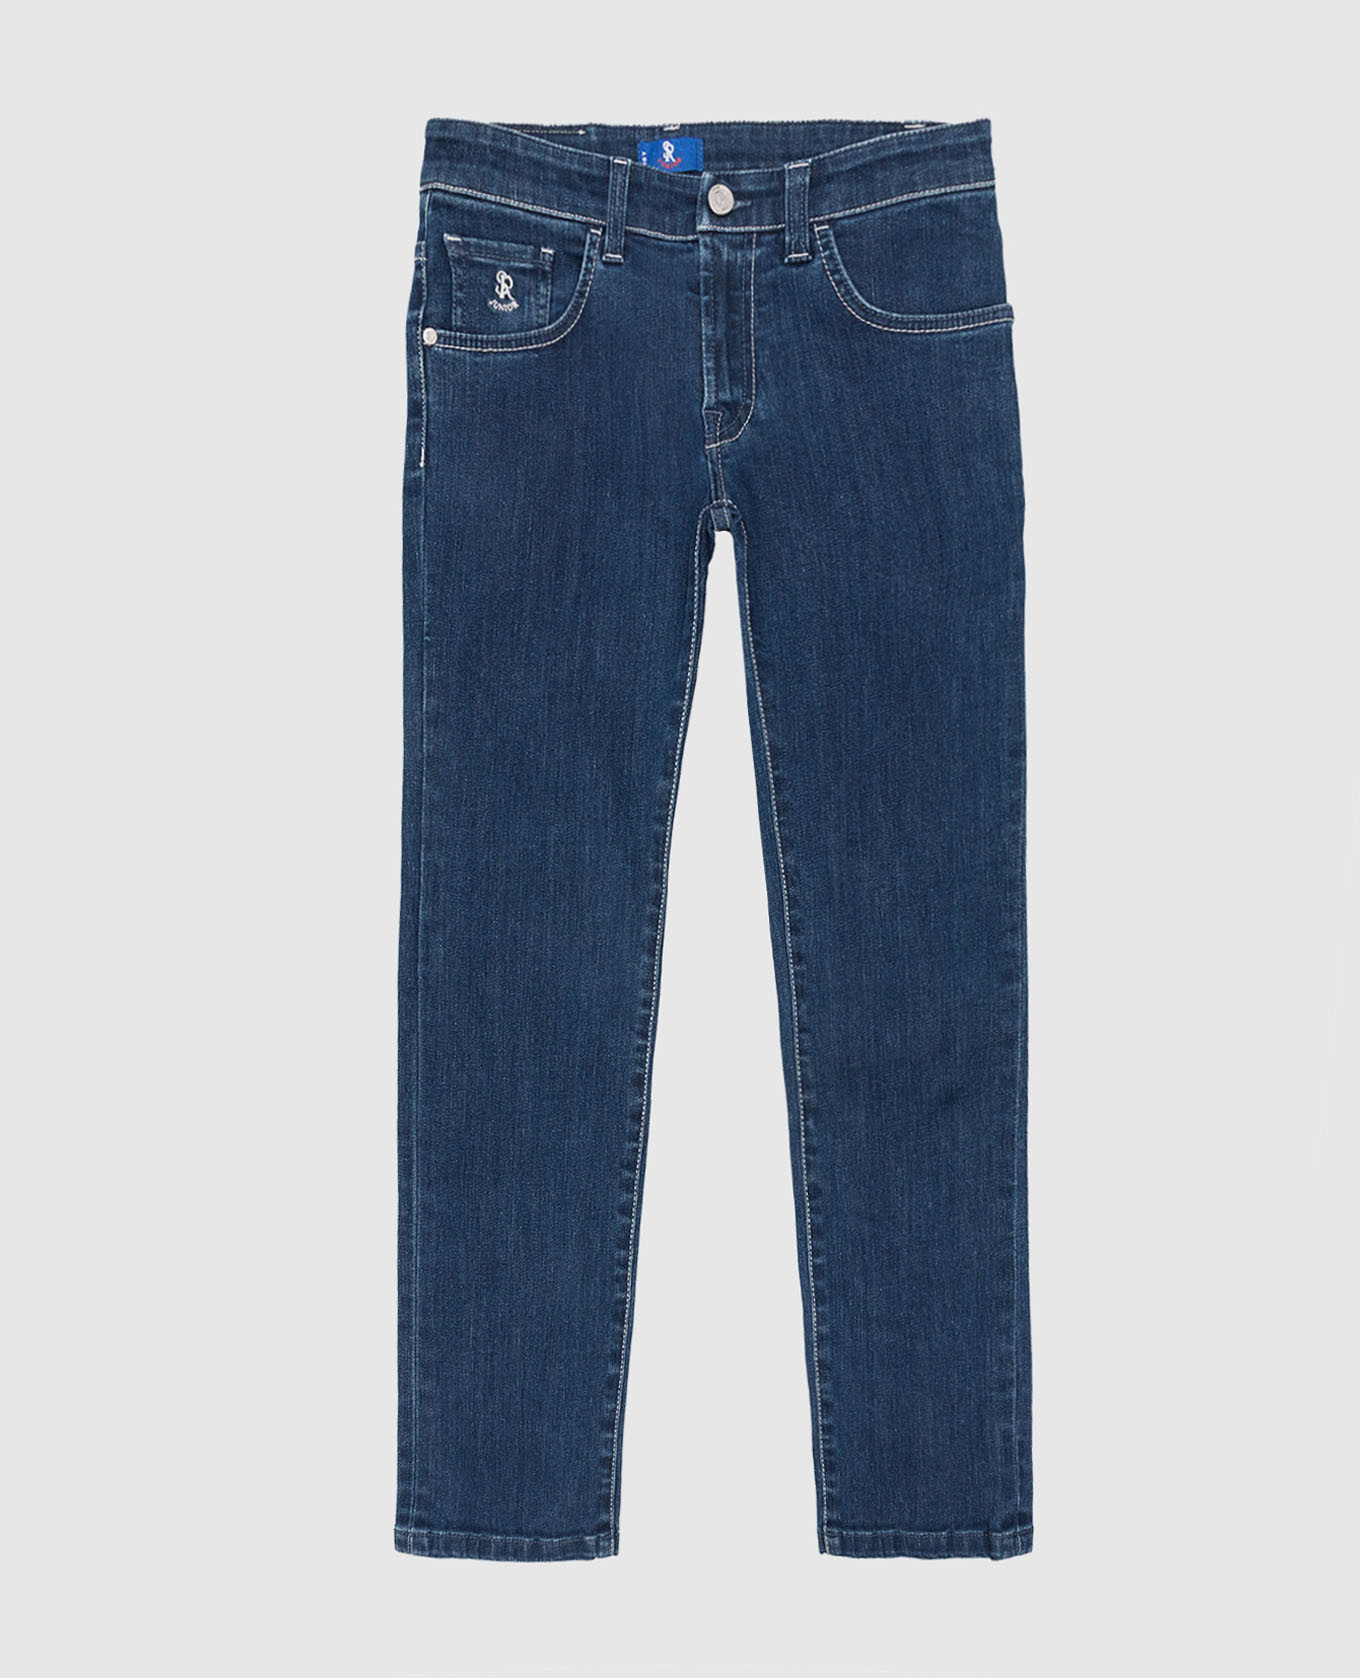 Kids blue jeans with logo